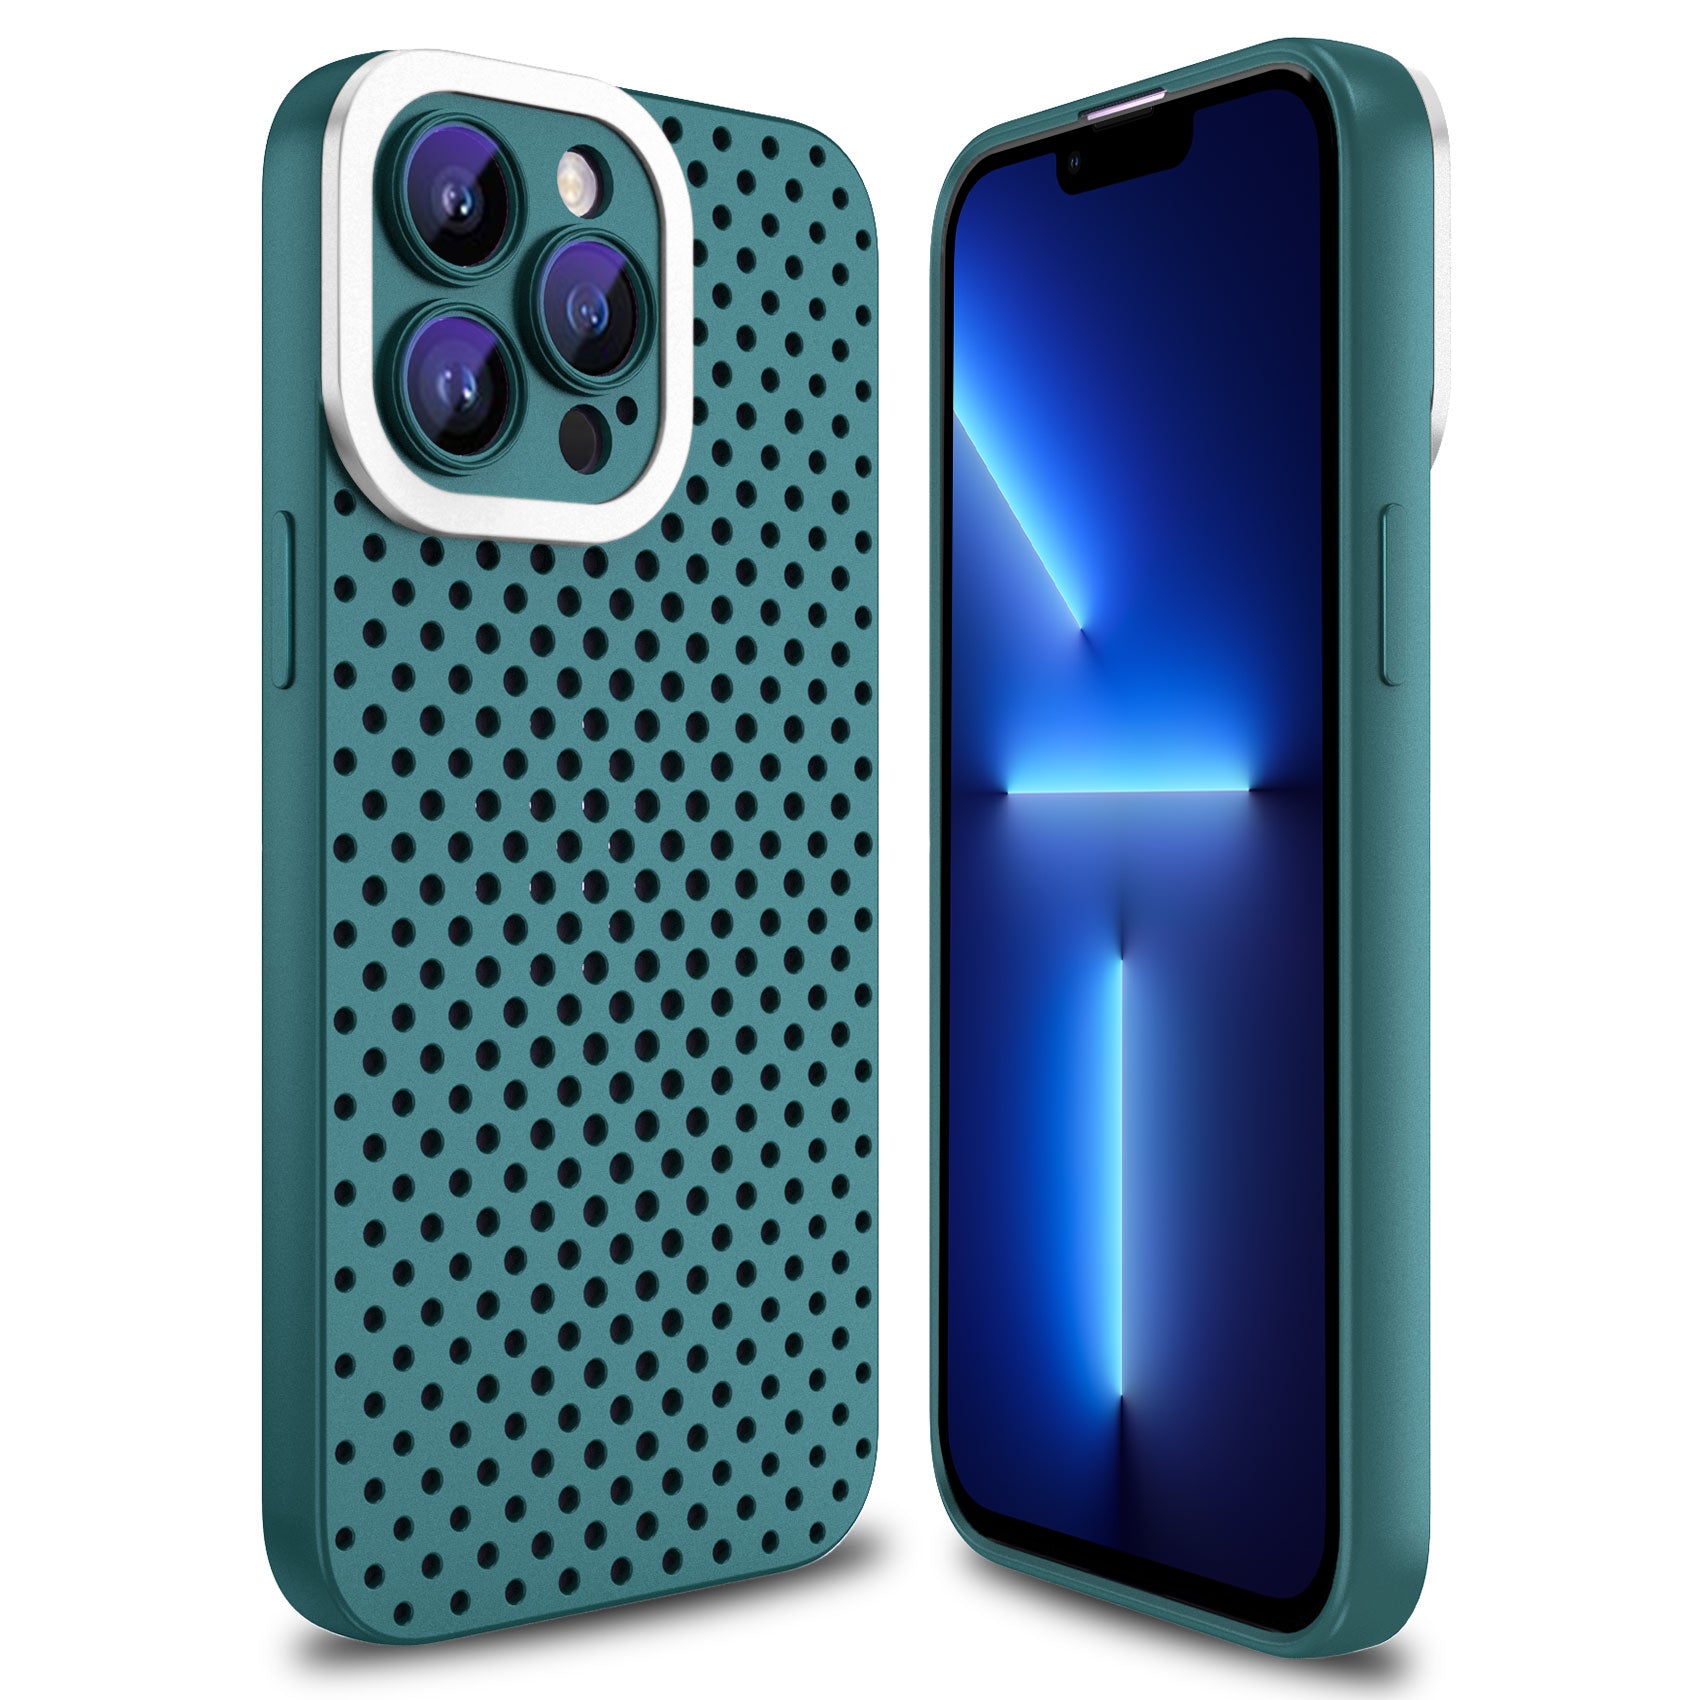 Uniqkart for iPhone 13 Pro Max 6.7 inch Skin-touch TPU Case Hollow Hole Heat Dissipation Phone Cover - Green